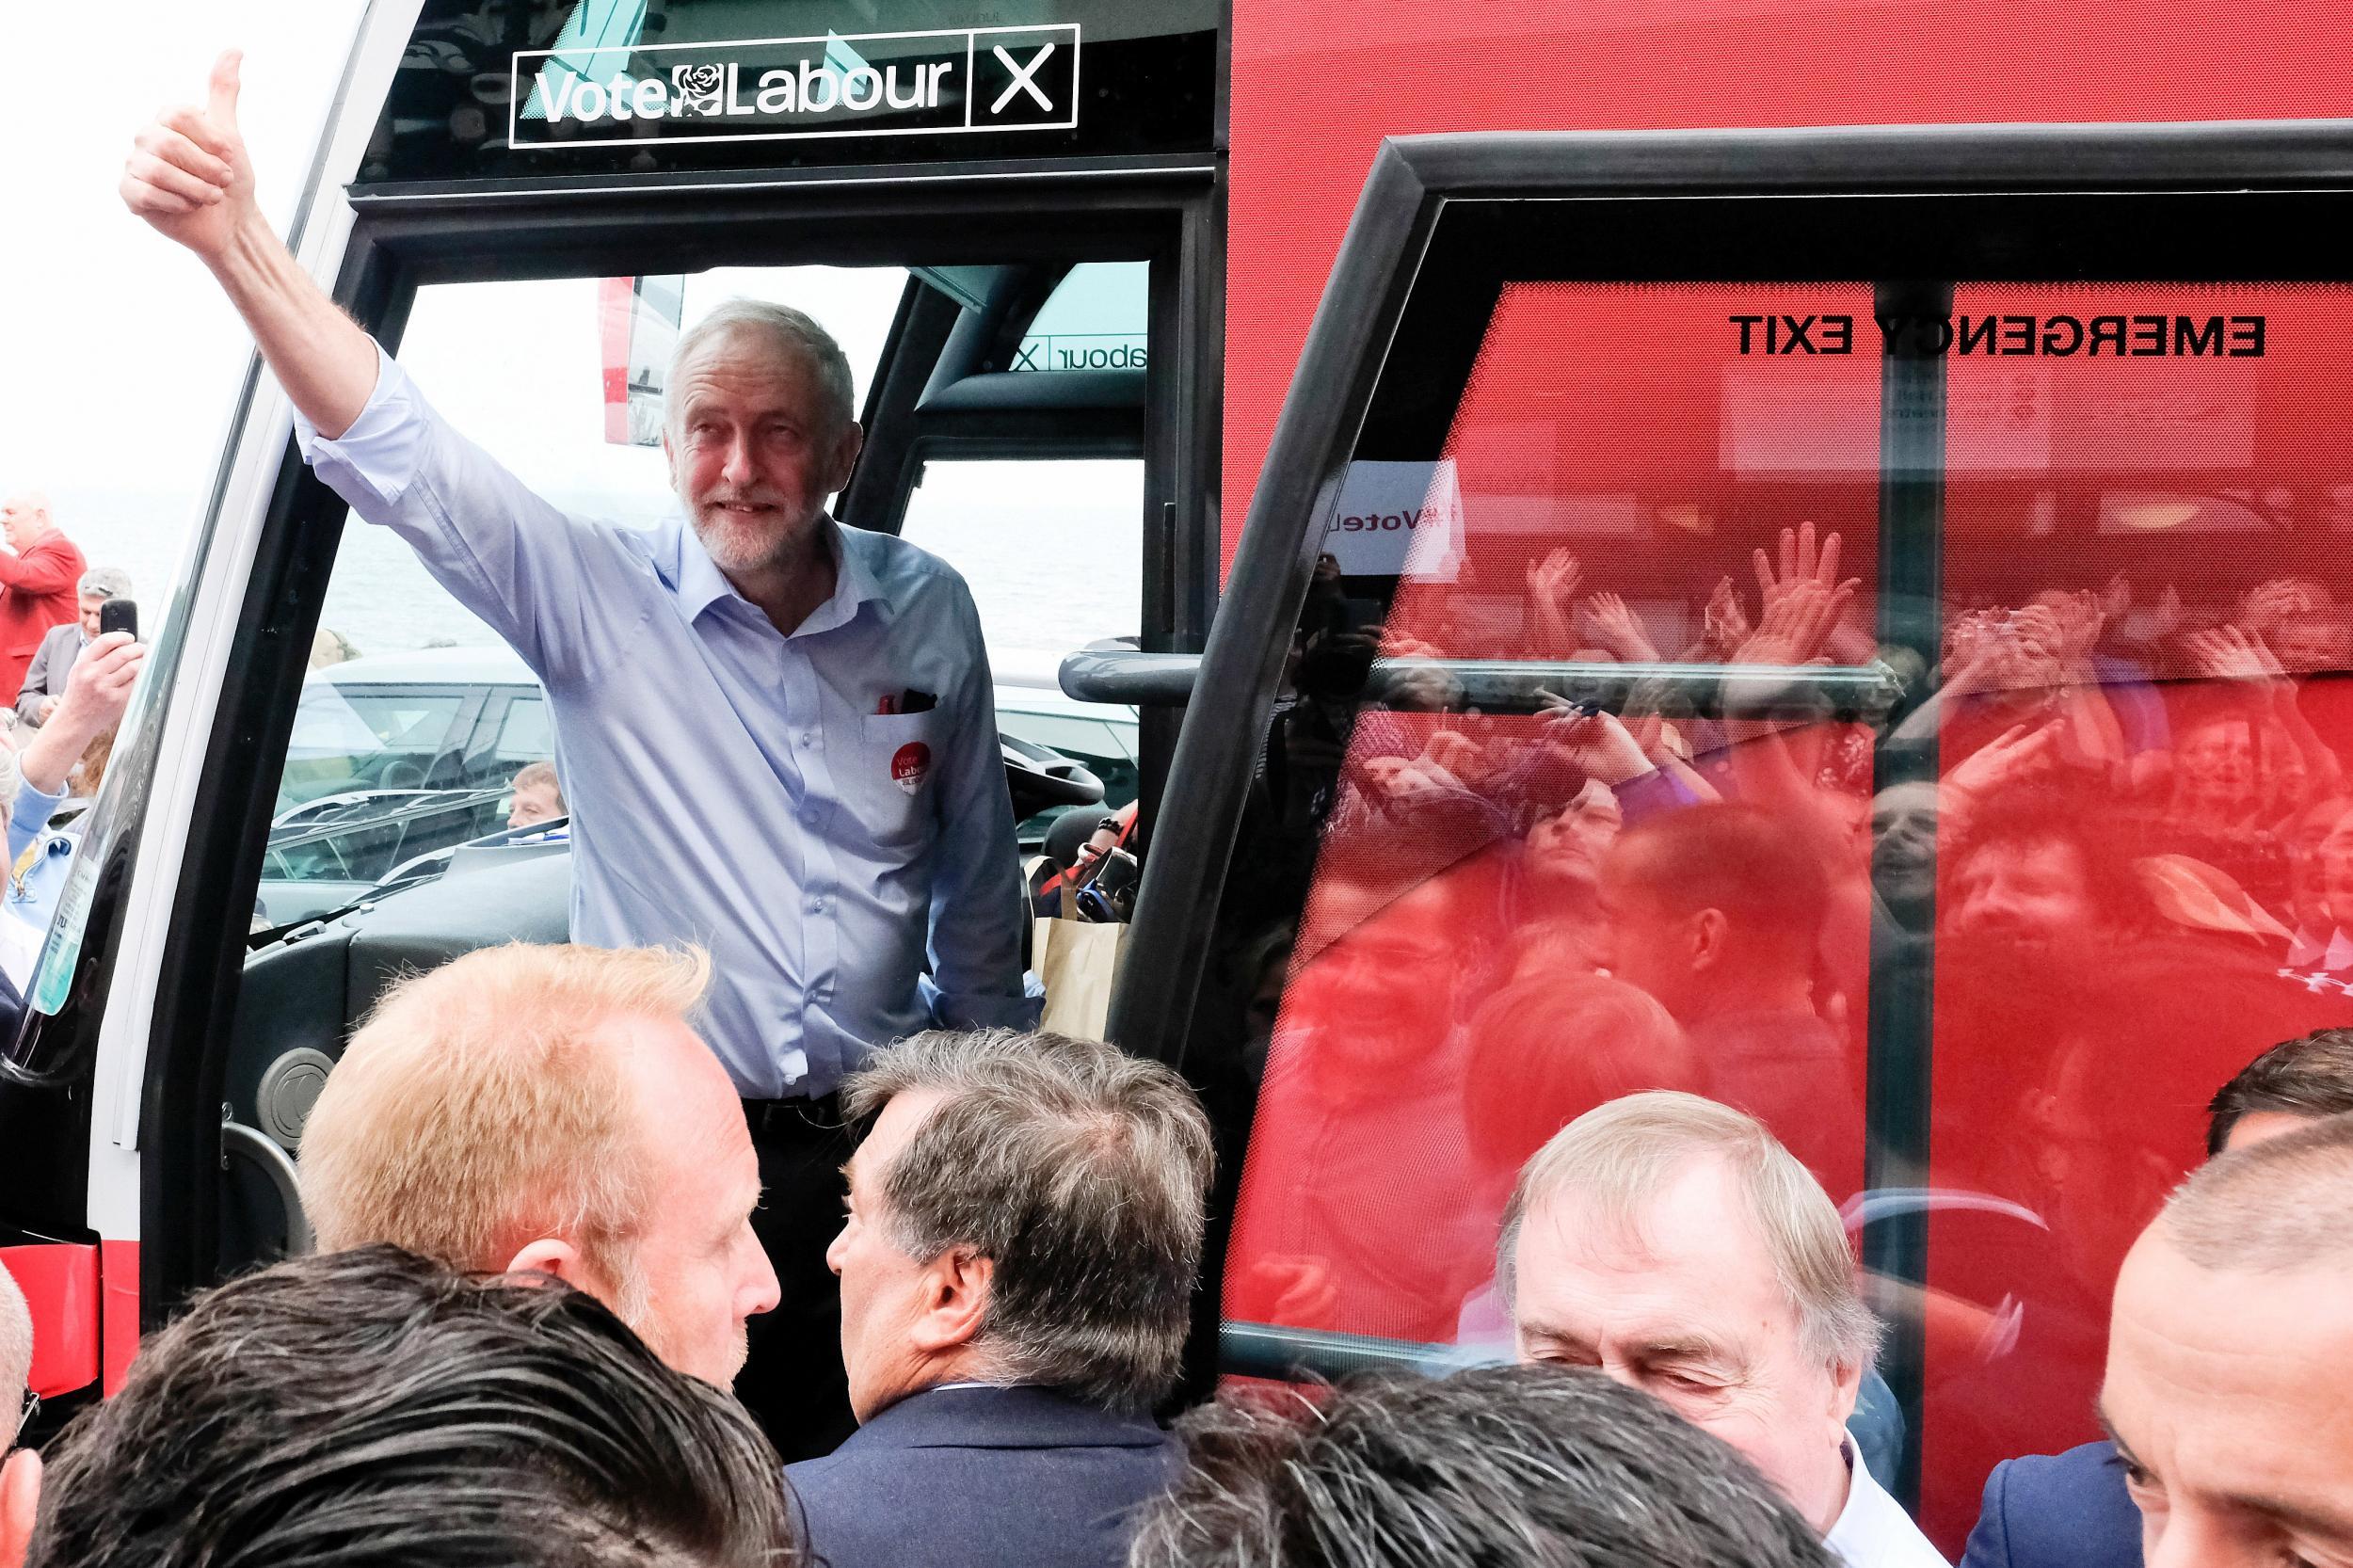 Labour Leader Jeremy Corbyn leaves on the campaign bus after speaking to supporters during a visit to the Spa buildings on Scarborough seafront